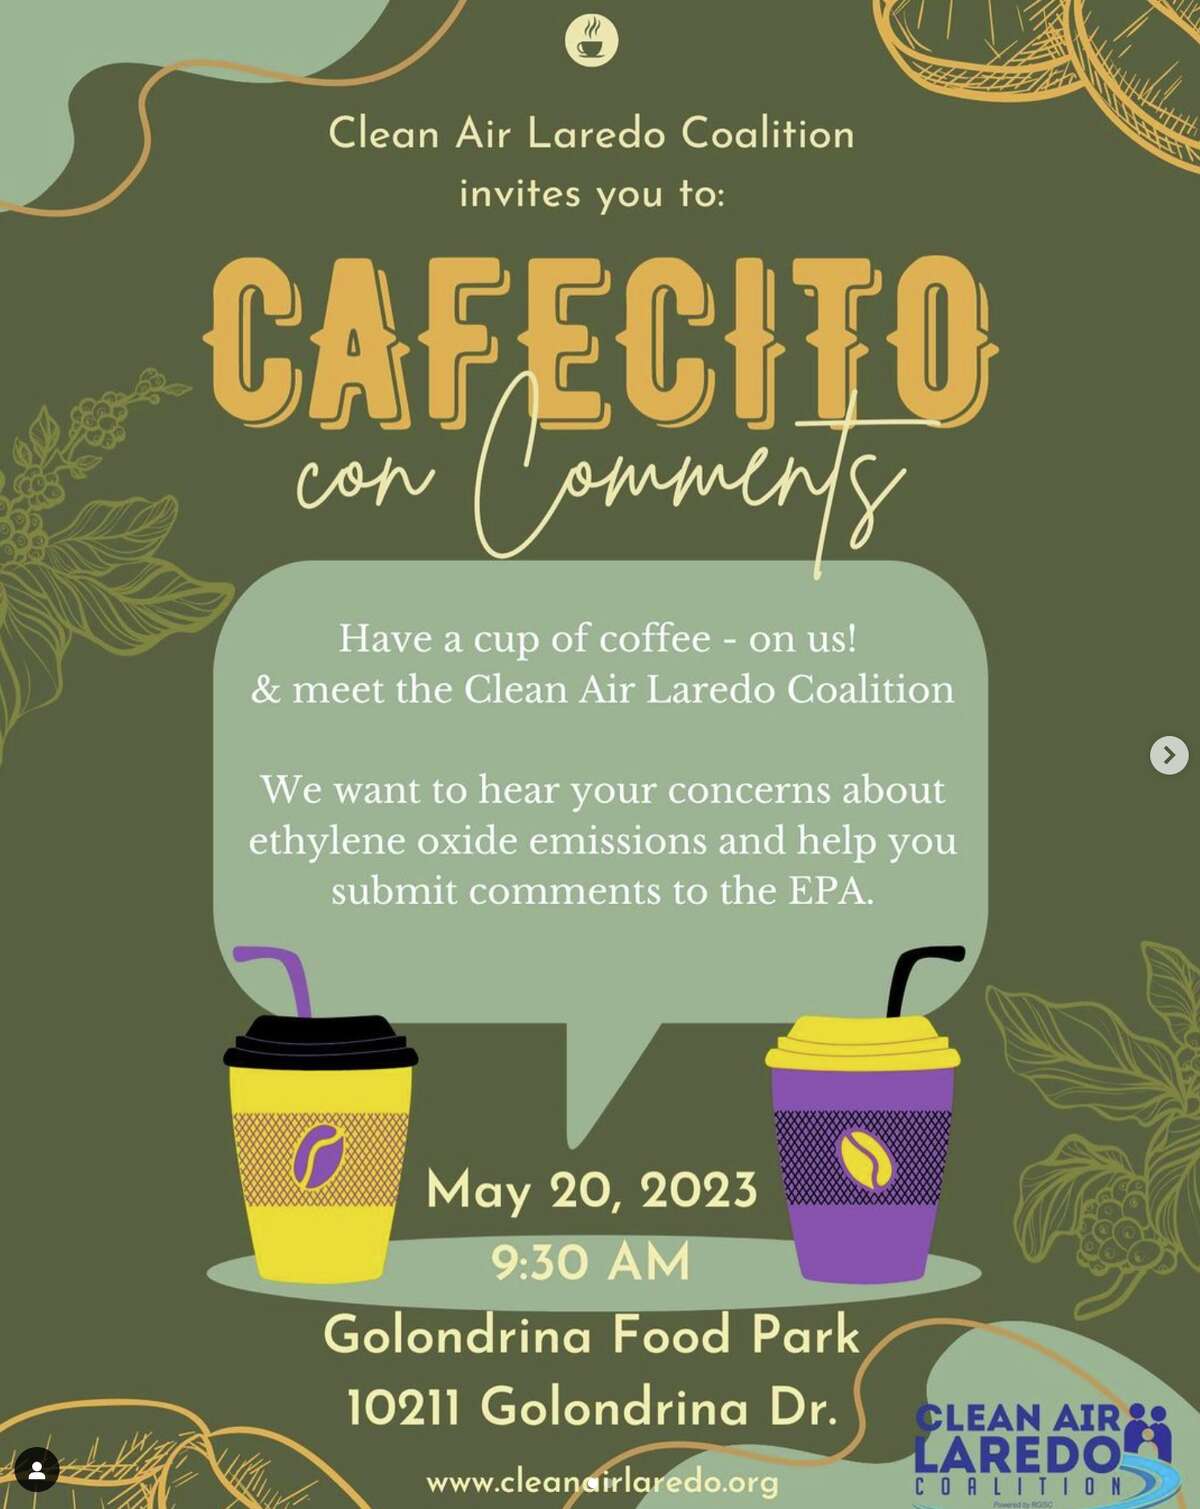 The Clean Air Laredo Coalition is inviting the community to learn about their mission over some free cafecito, the organization announced this week. 